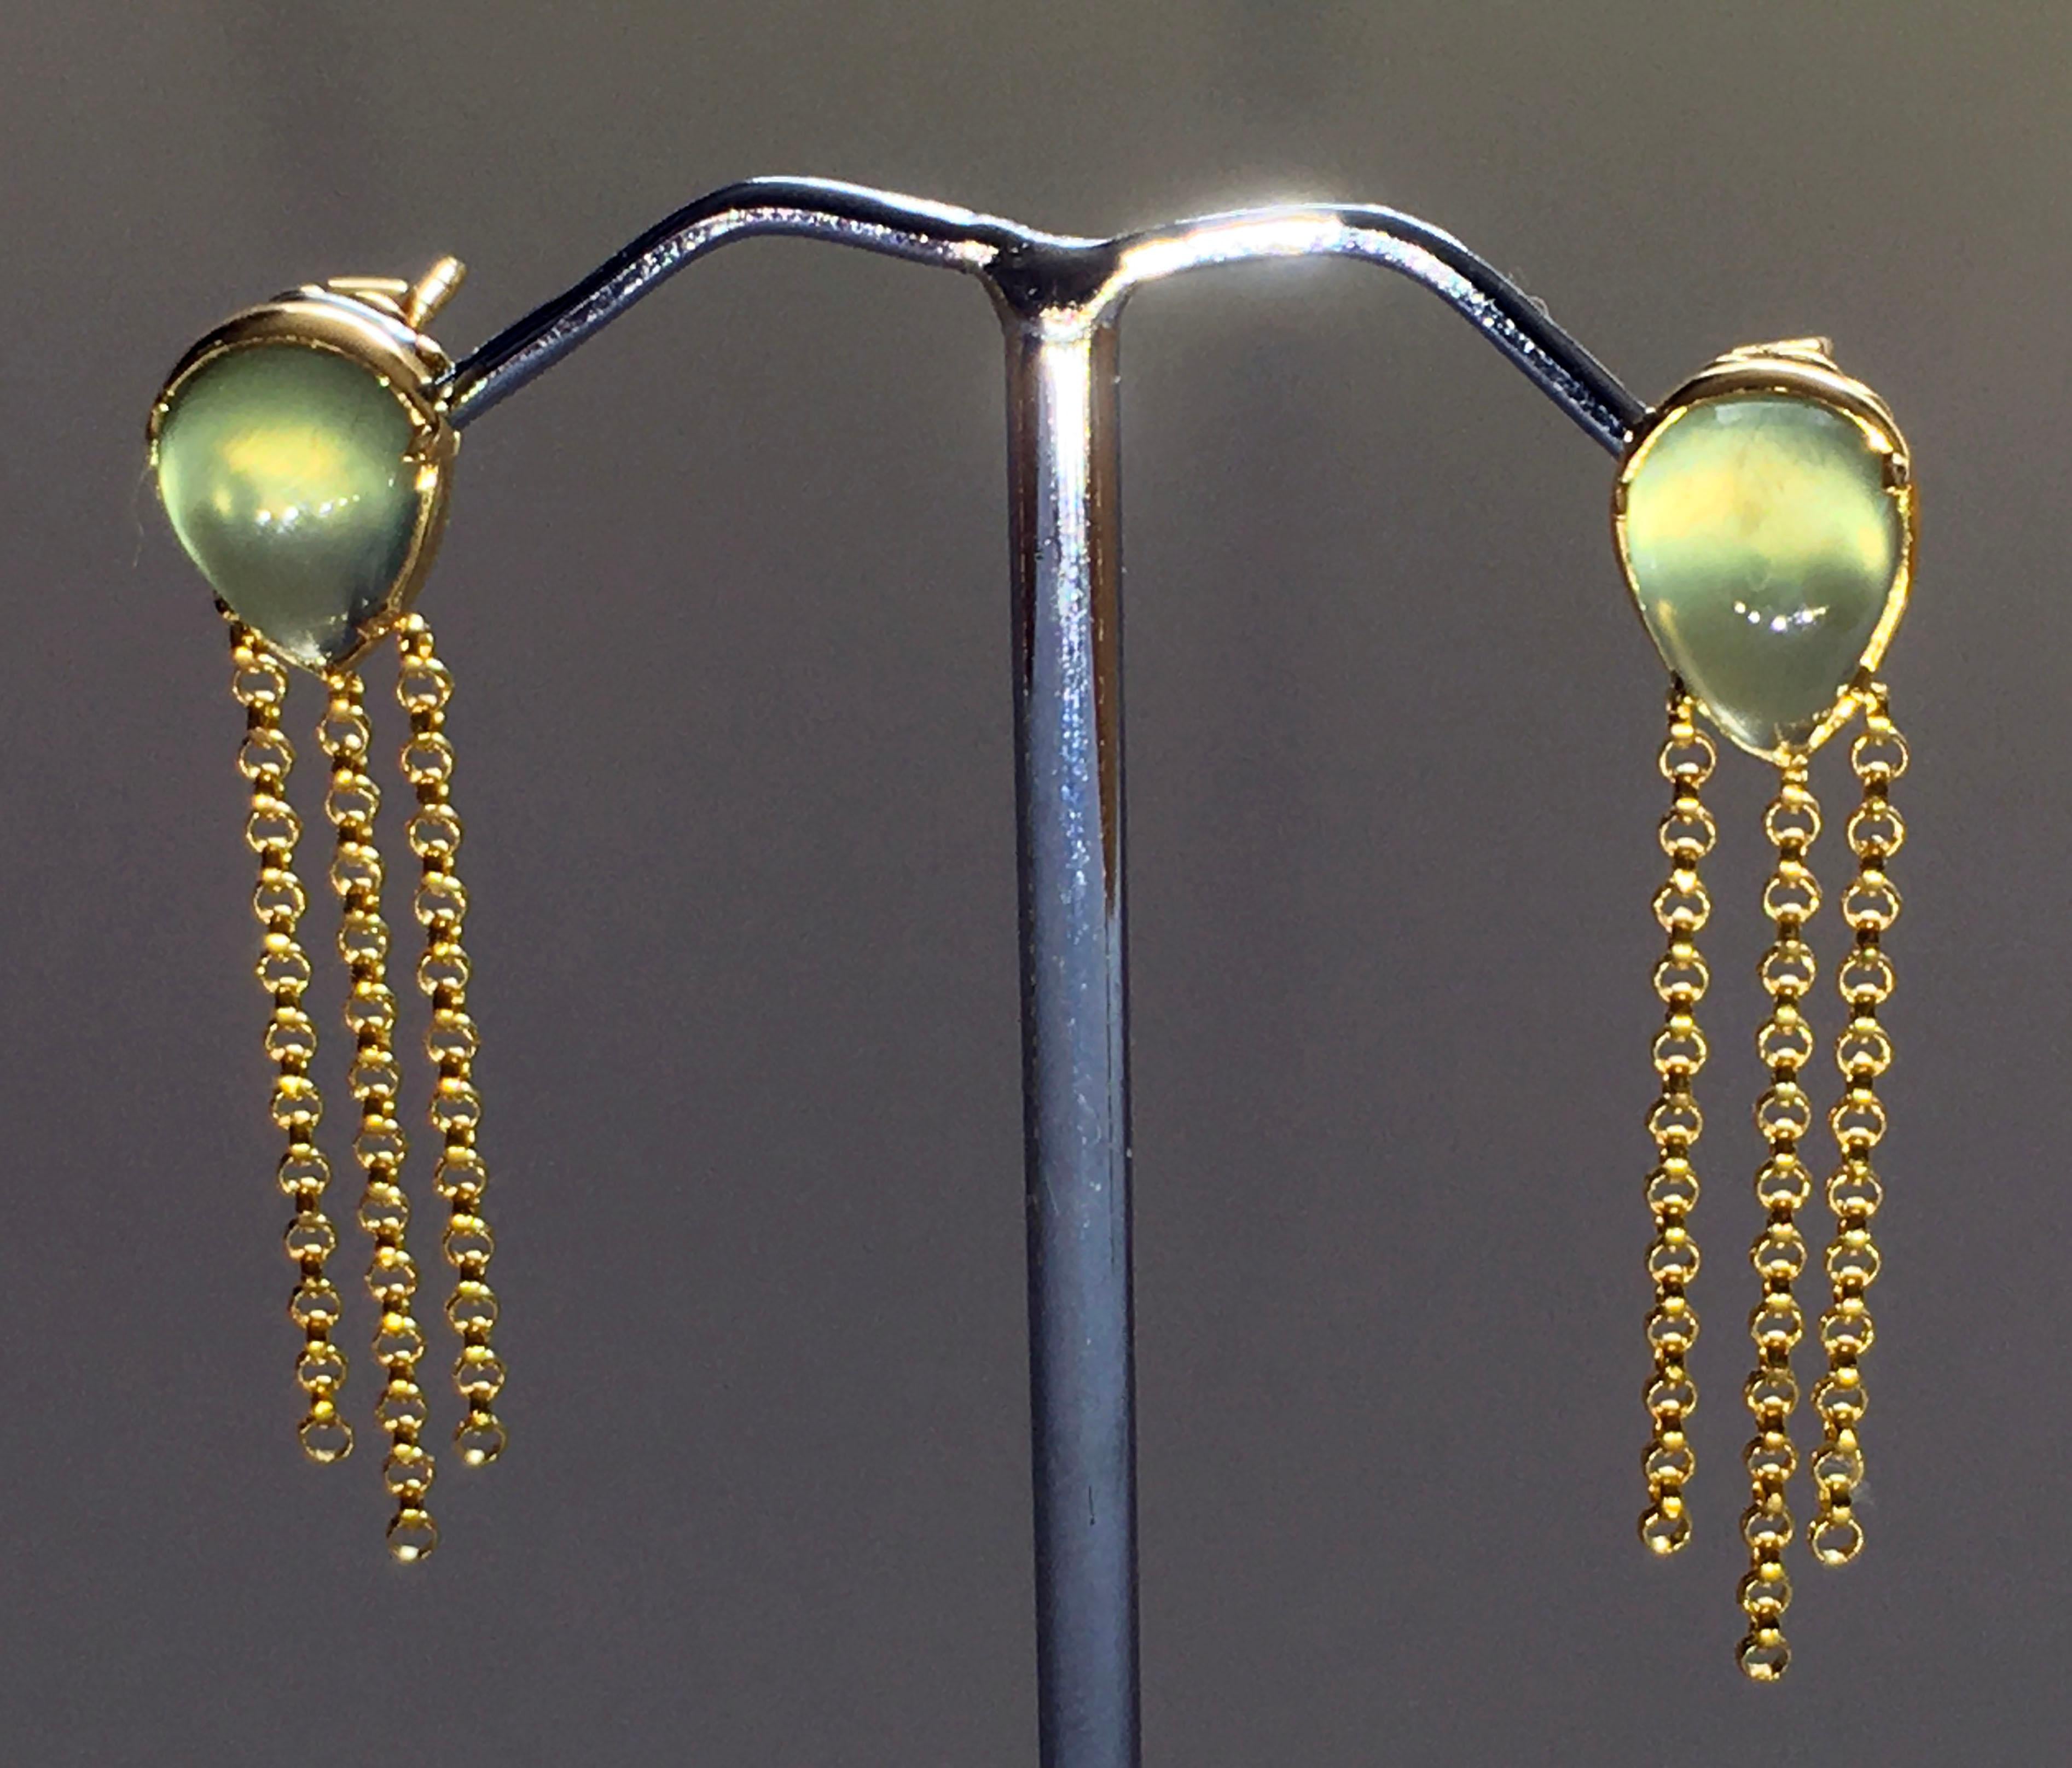 Classical Roman 18kt Gold Dangle Earrings set with Prehnite Cabochons 3